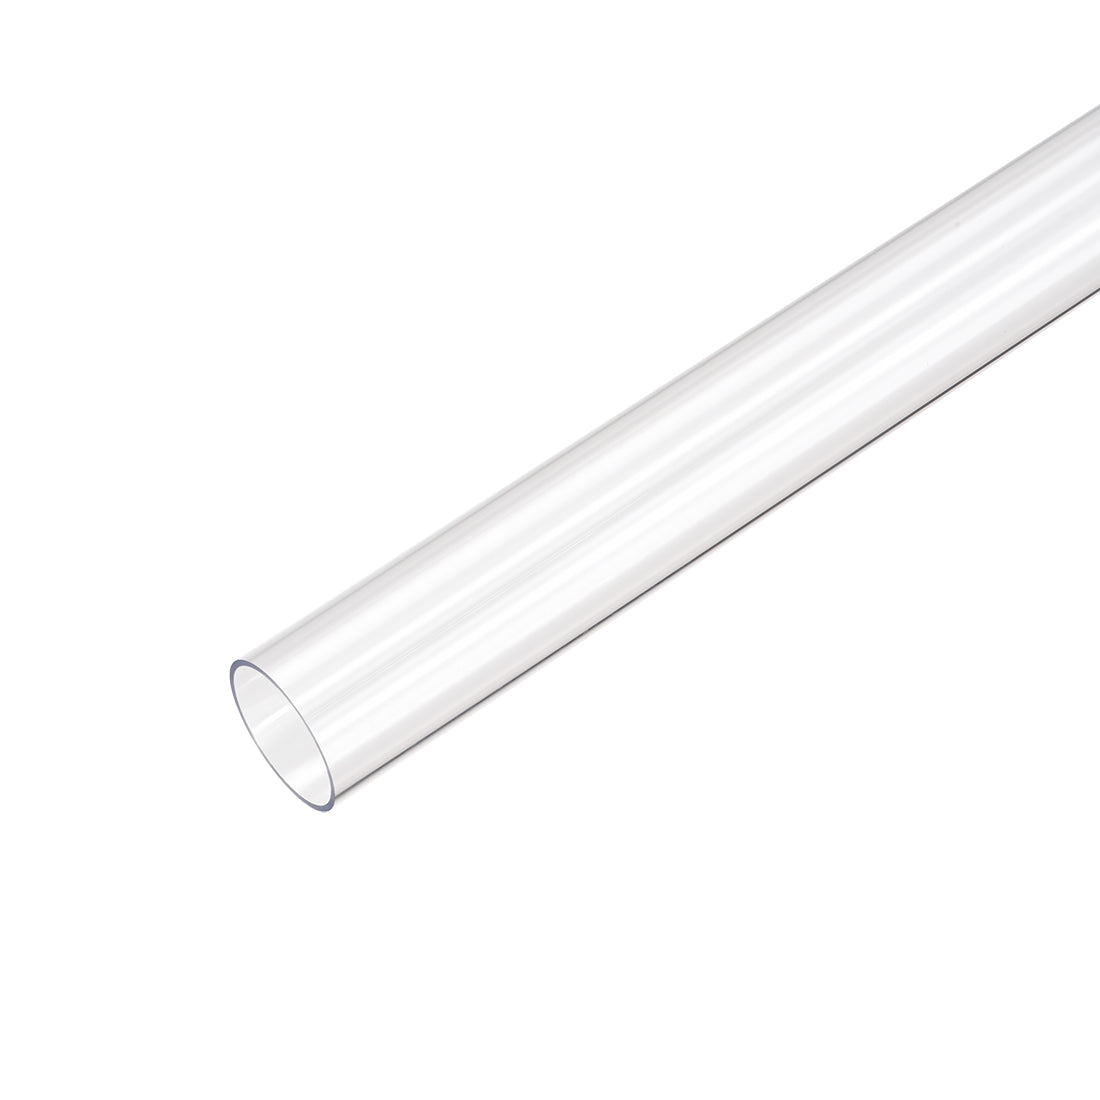 uxcell Uxcell PC Rigid Round Clear Tubing, 18mm ID x 20mm OD, 0.5M/1.64Ft Length